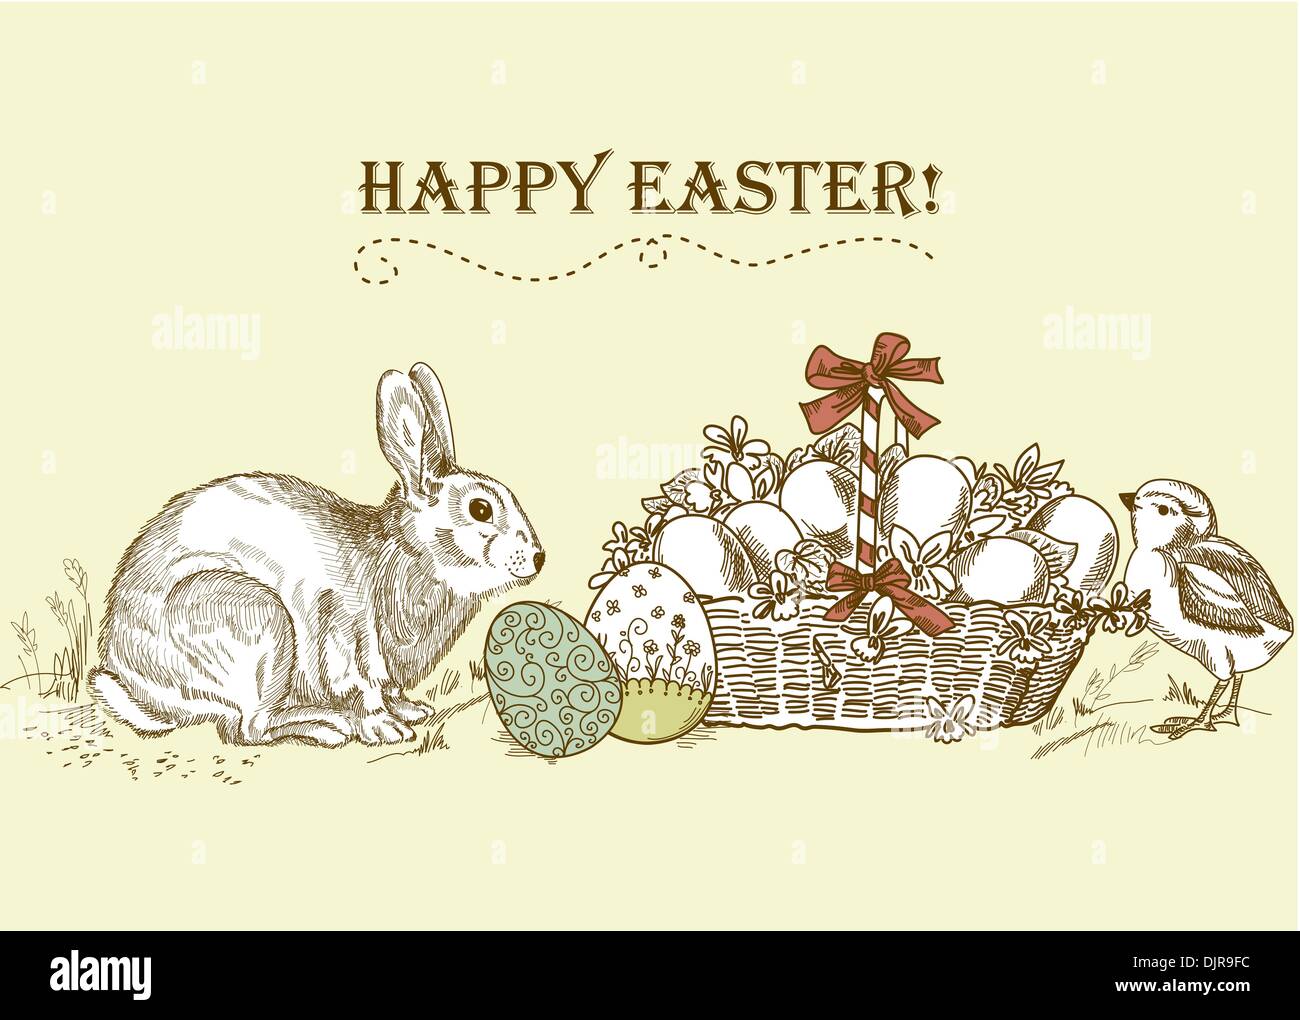 Vintage Easter Card Stock Vector